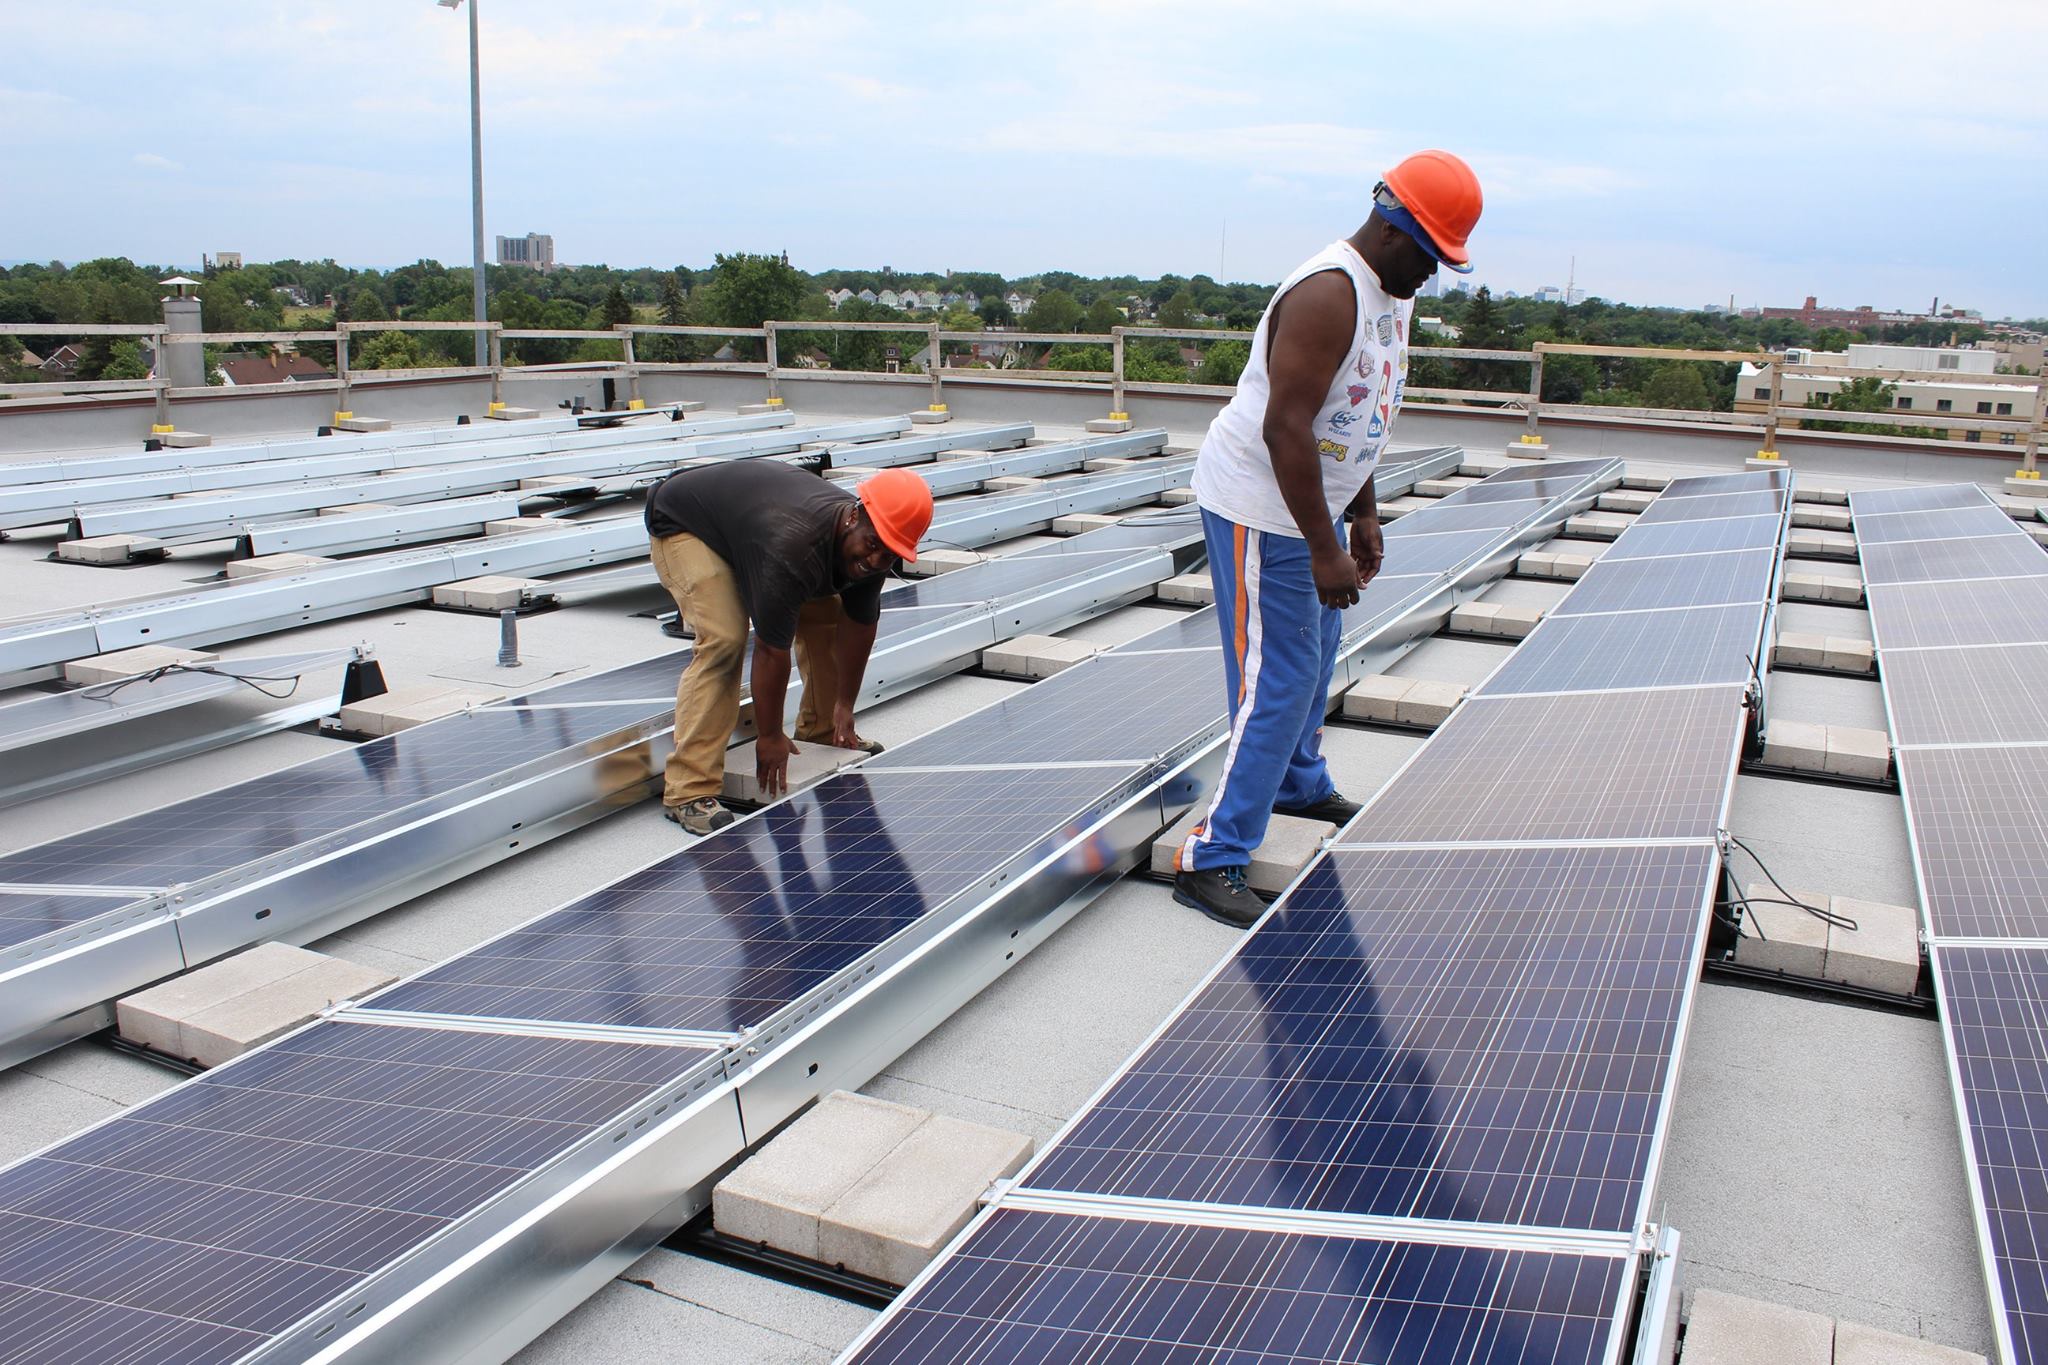 Two men working on installing solar panels on a school roof. There are rows of solar panels and the men are bent over working on installing two.